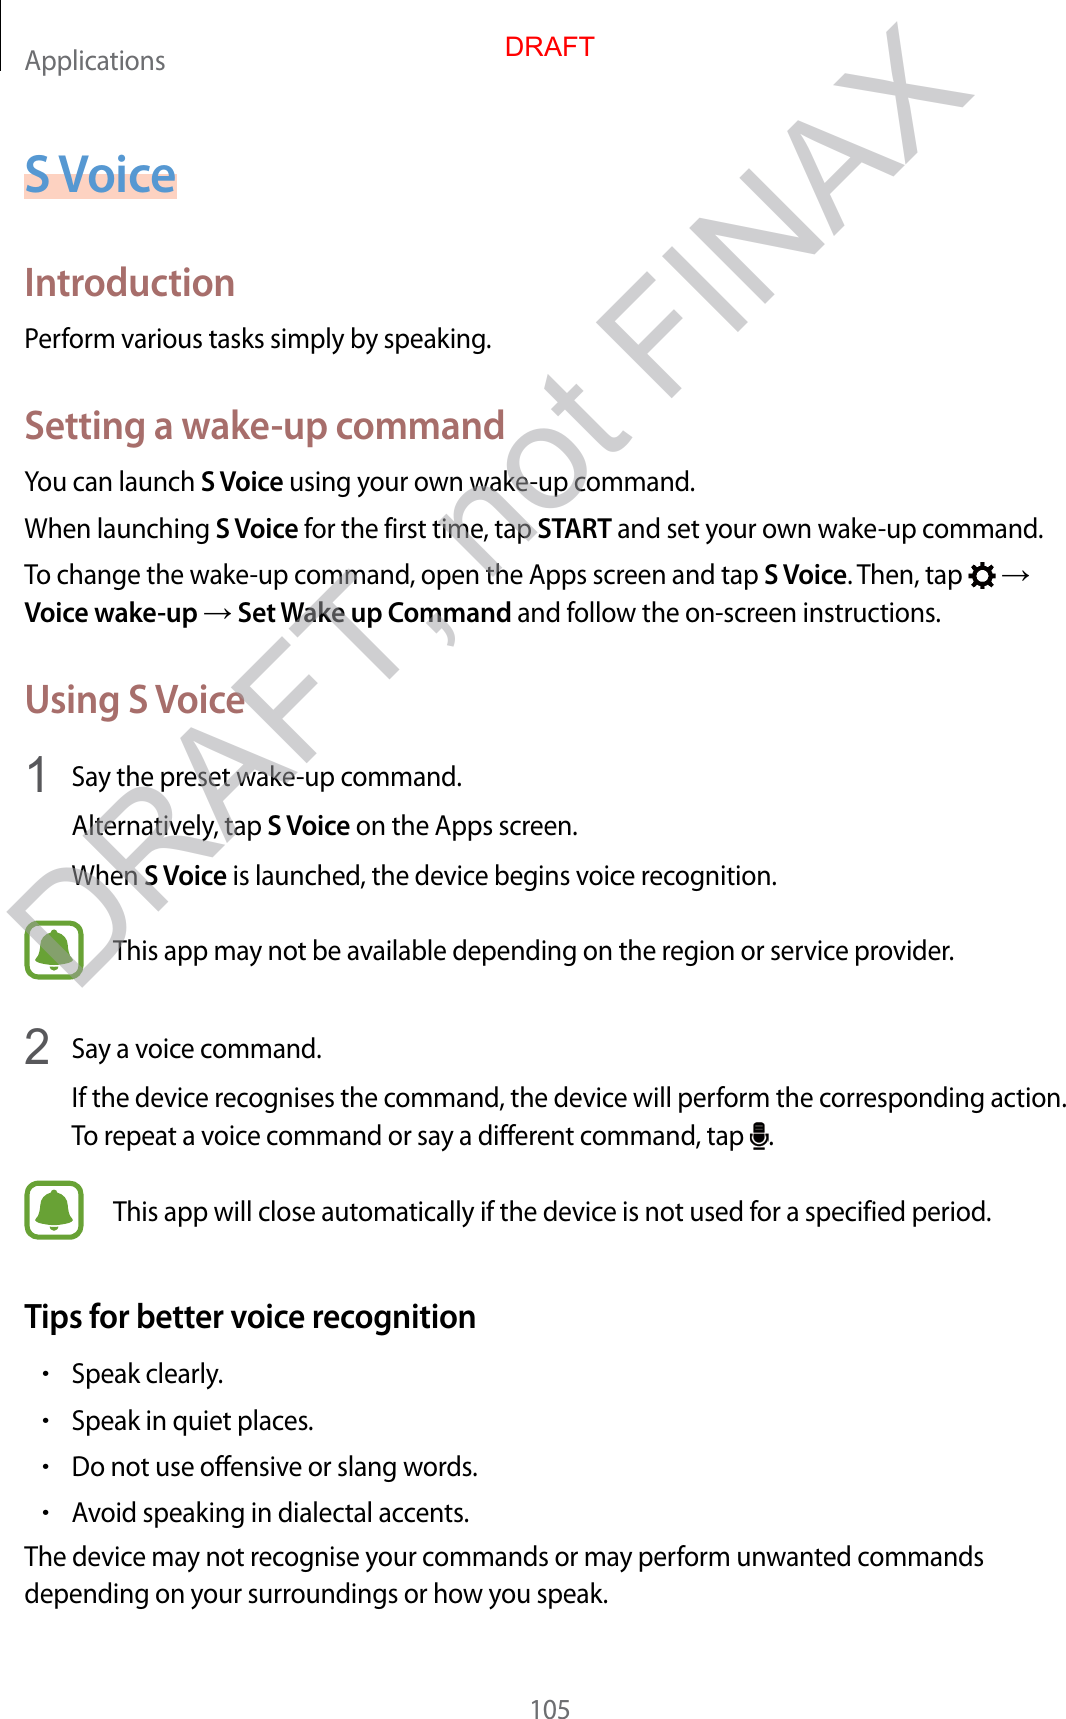 Applications105S VoiceIntroductionPerform various tasks simply by speaking.Setting a wake-up commandYou can launch S Voice using your own wake-up command.When launching S Voice for the first time, tap START and set your own wake-up command.To change the wake-up command, open the Apps screen and tap S Voice. Then, tap    Voice wake-up  Set Wake up Command and follow the on-screen instructions.Using S Voice1  Say the preset wake-up command.Alternatively, tap S Voice on the Apps screen.When S Voice is launched, the device begins voice recognition.This app may not be available depending on the region or service provider.2  Say a voice command.If the device recognises the command, the device will perform the corresponding action. To repeat a voice command or say a different command, tap  .This app will close automatically if the device is not used for a specified period.Tips for better voice recognition•Speak clearly.•Speak in quiet places.•Do not use offensive or slang words.•Avoid speaking in dialectal accents.The device may not recognise your commands or may perform unwanted commands depending on your surroundings or how you speak.DRAFTDRAFT, not FINAX